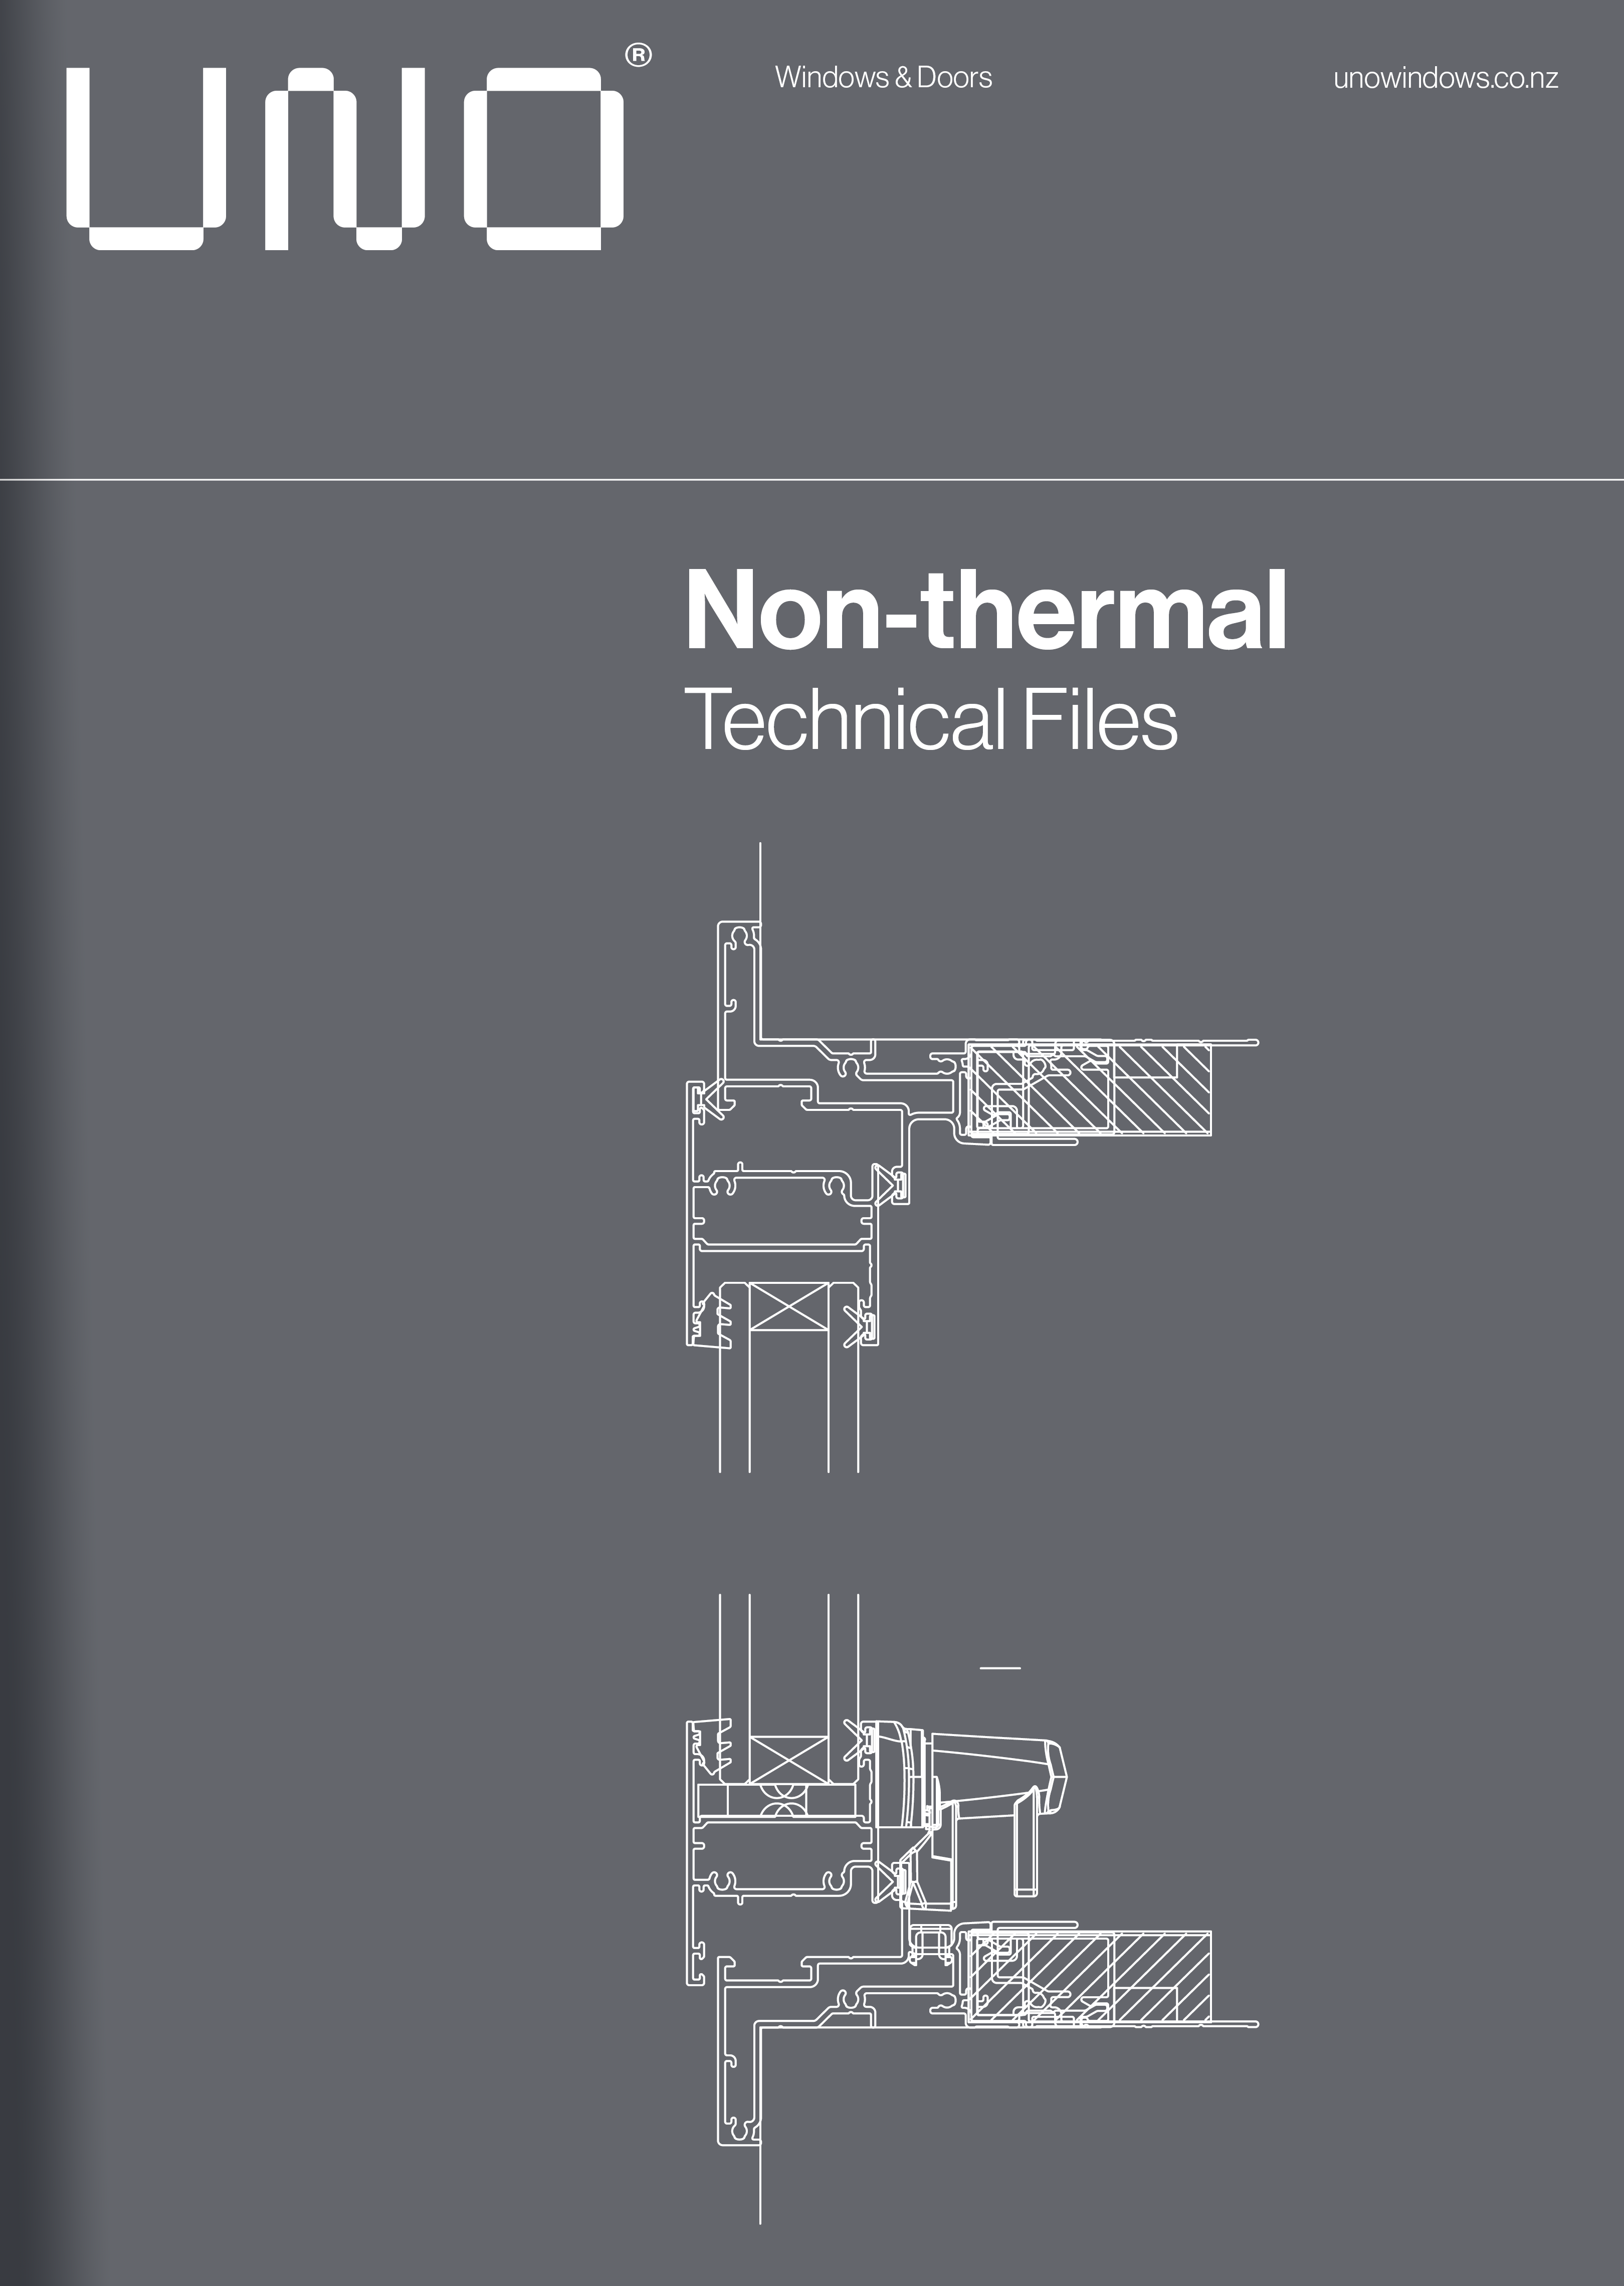 Download the non-thermal technical files